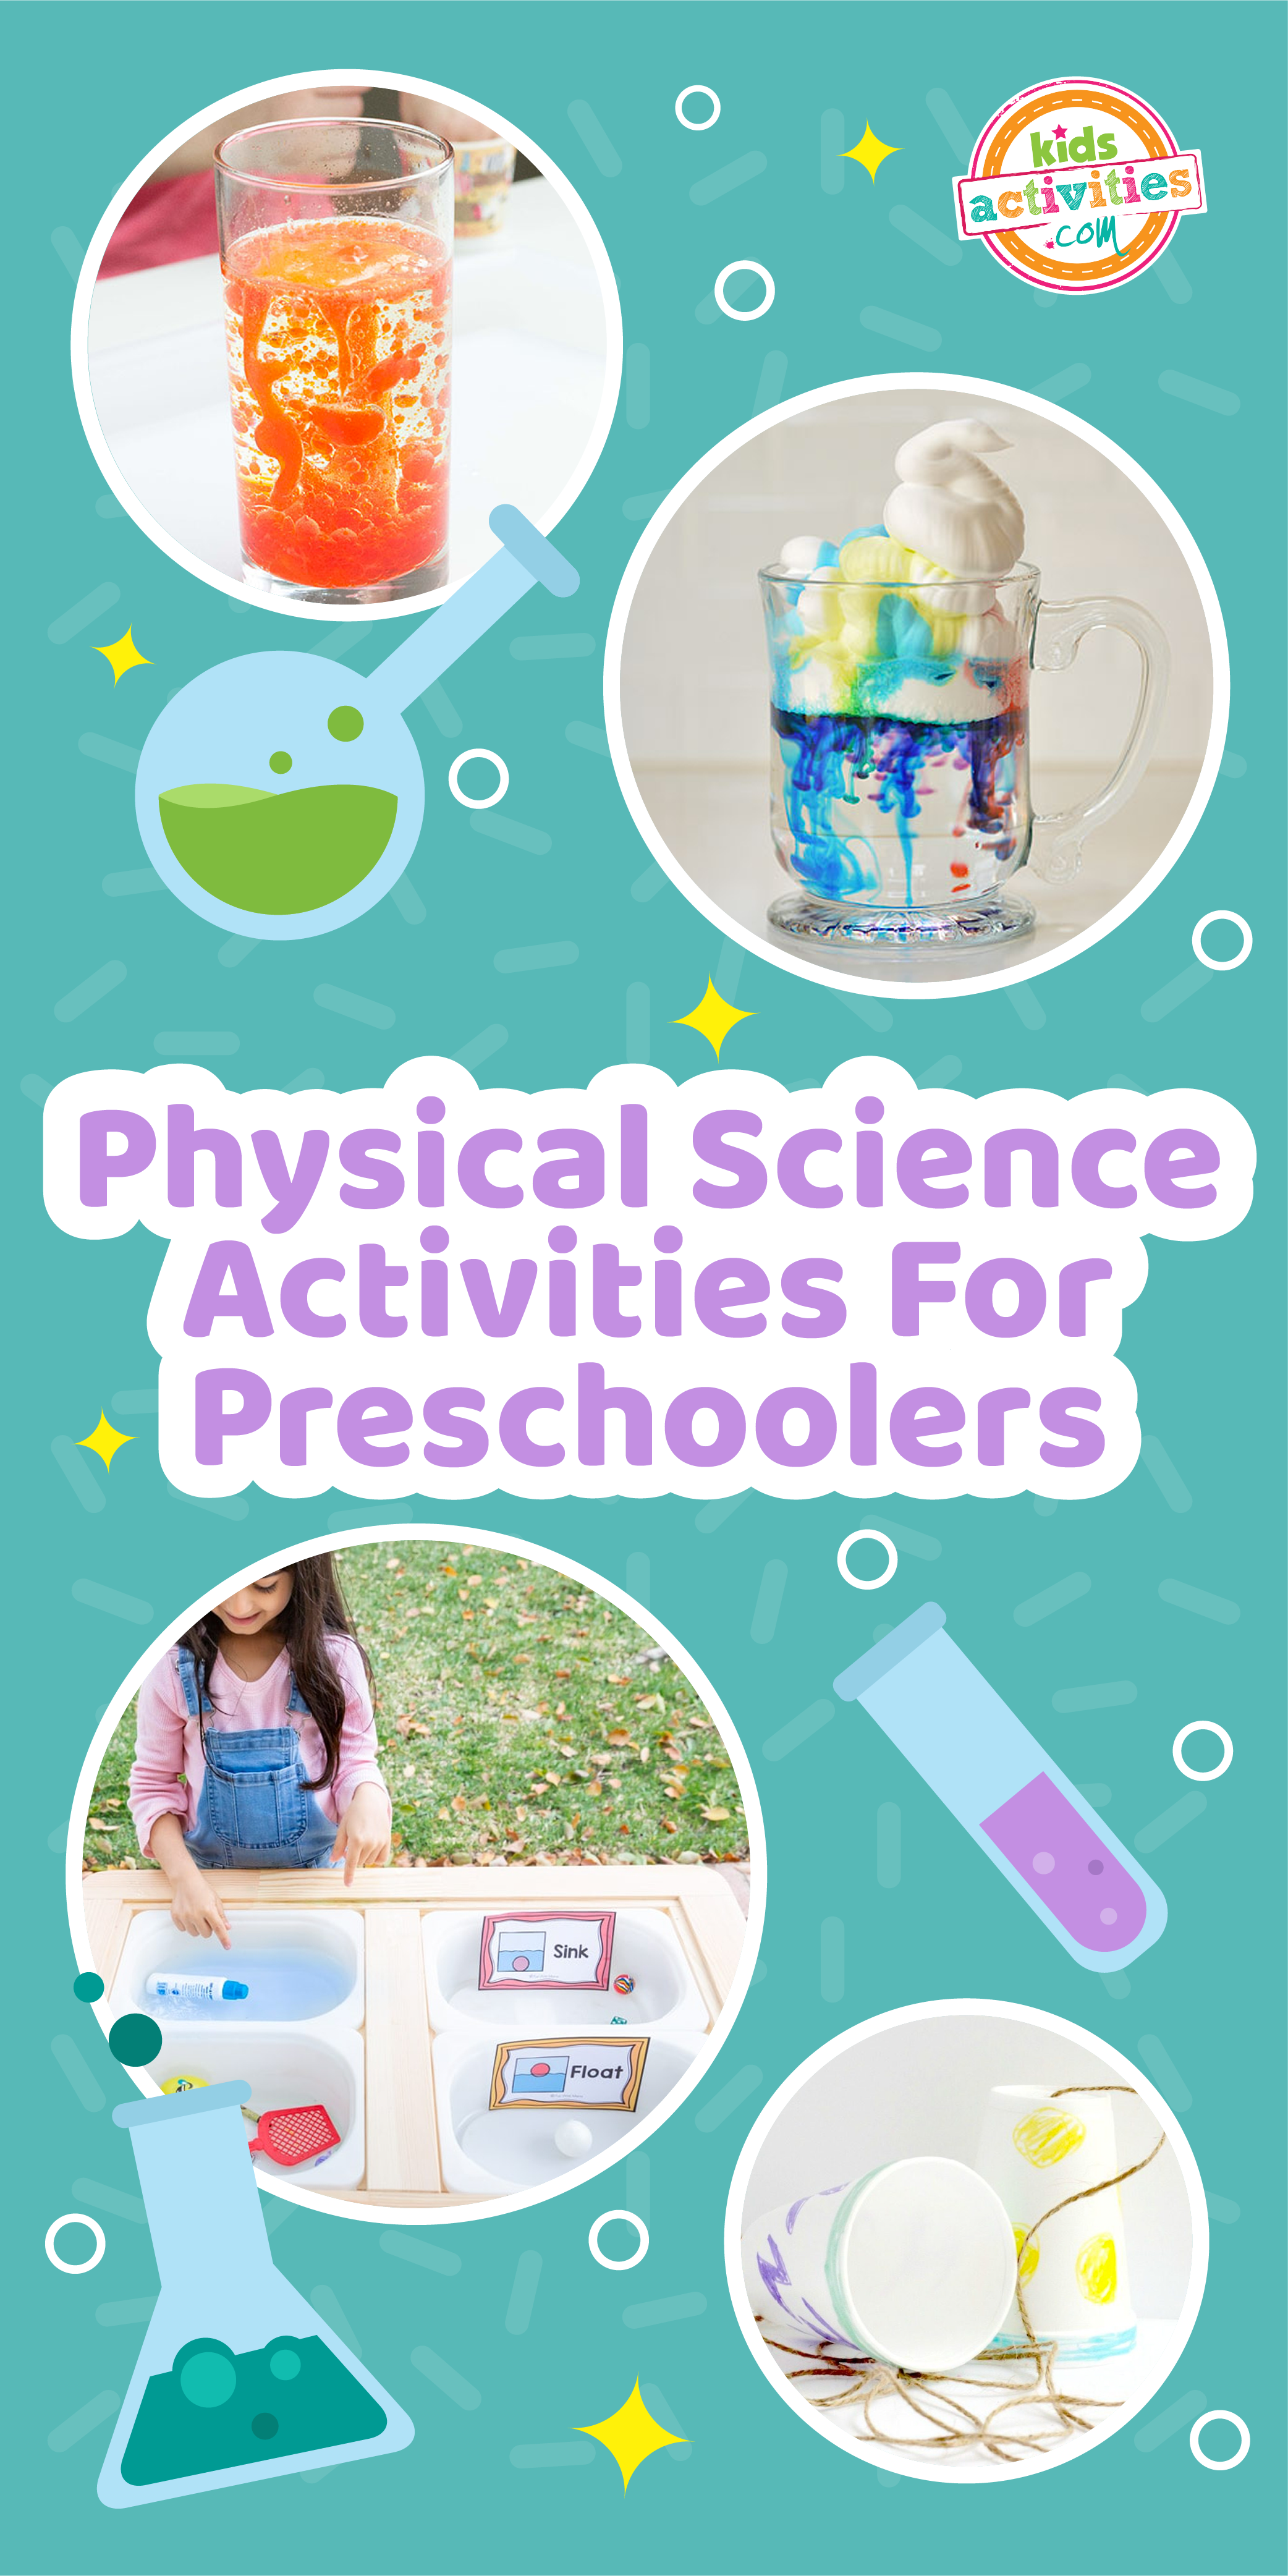 Image shows a compilation of physical science activities for preschoolers from different sources. 